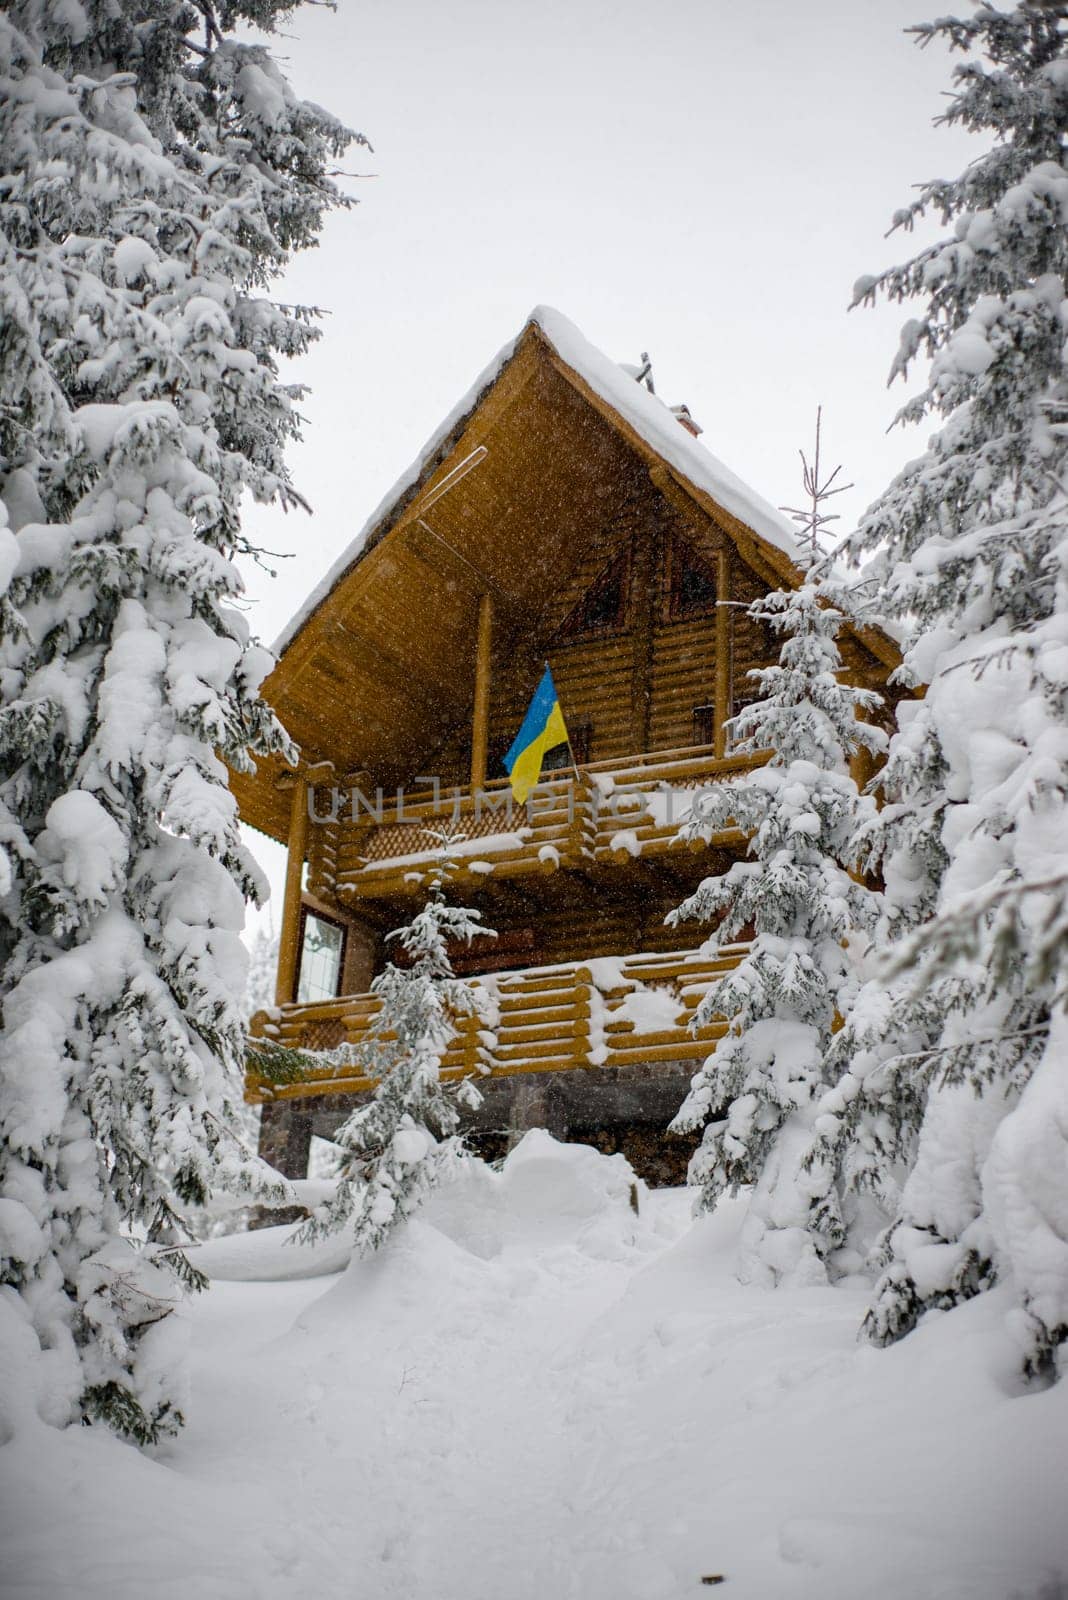 New wooden house in the snowy woods. Snowing. house flag of Ukraine. by Renisons